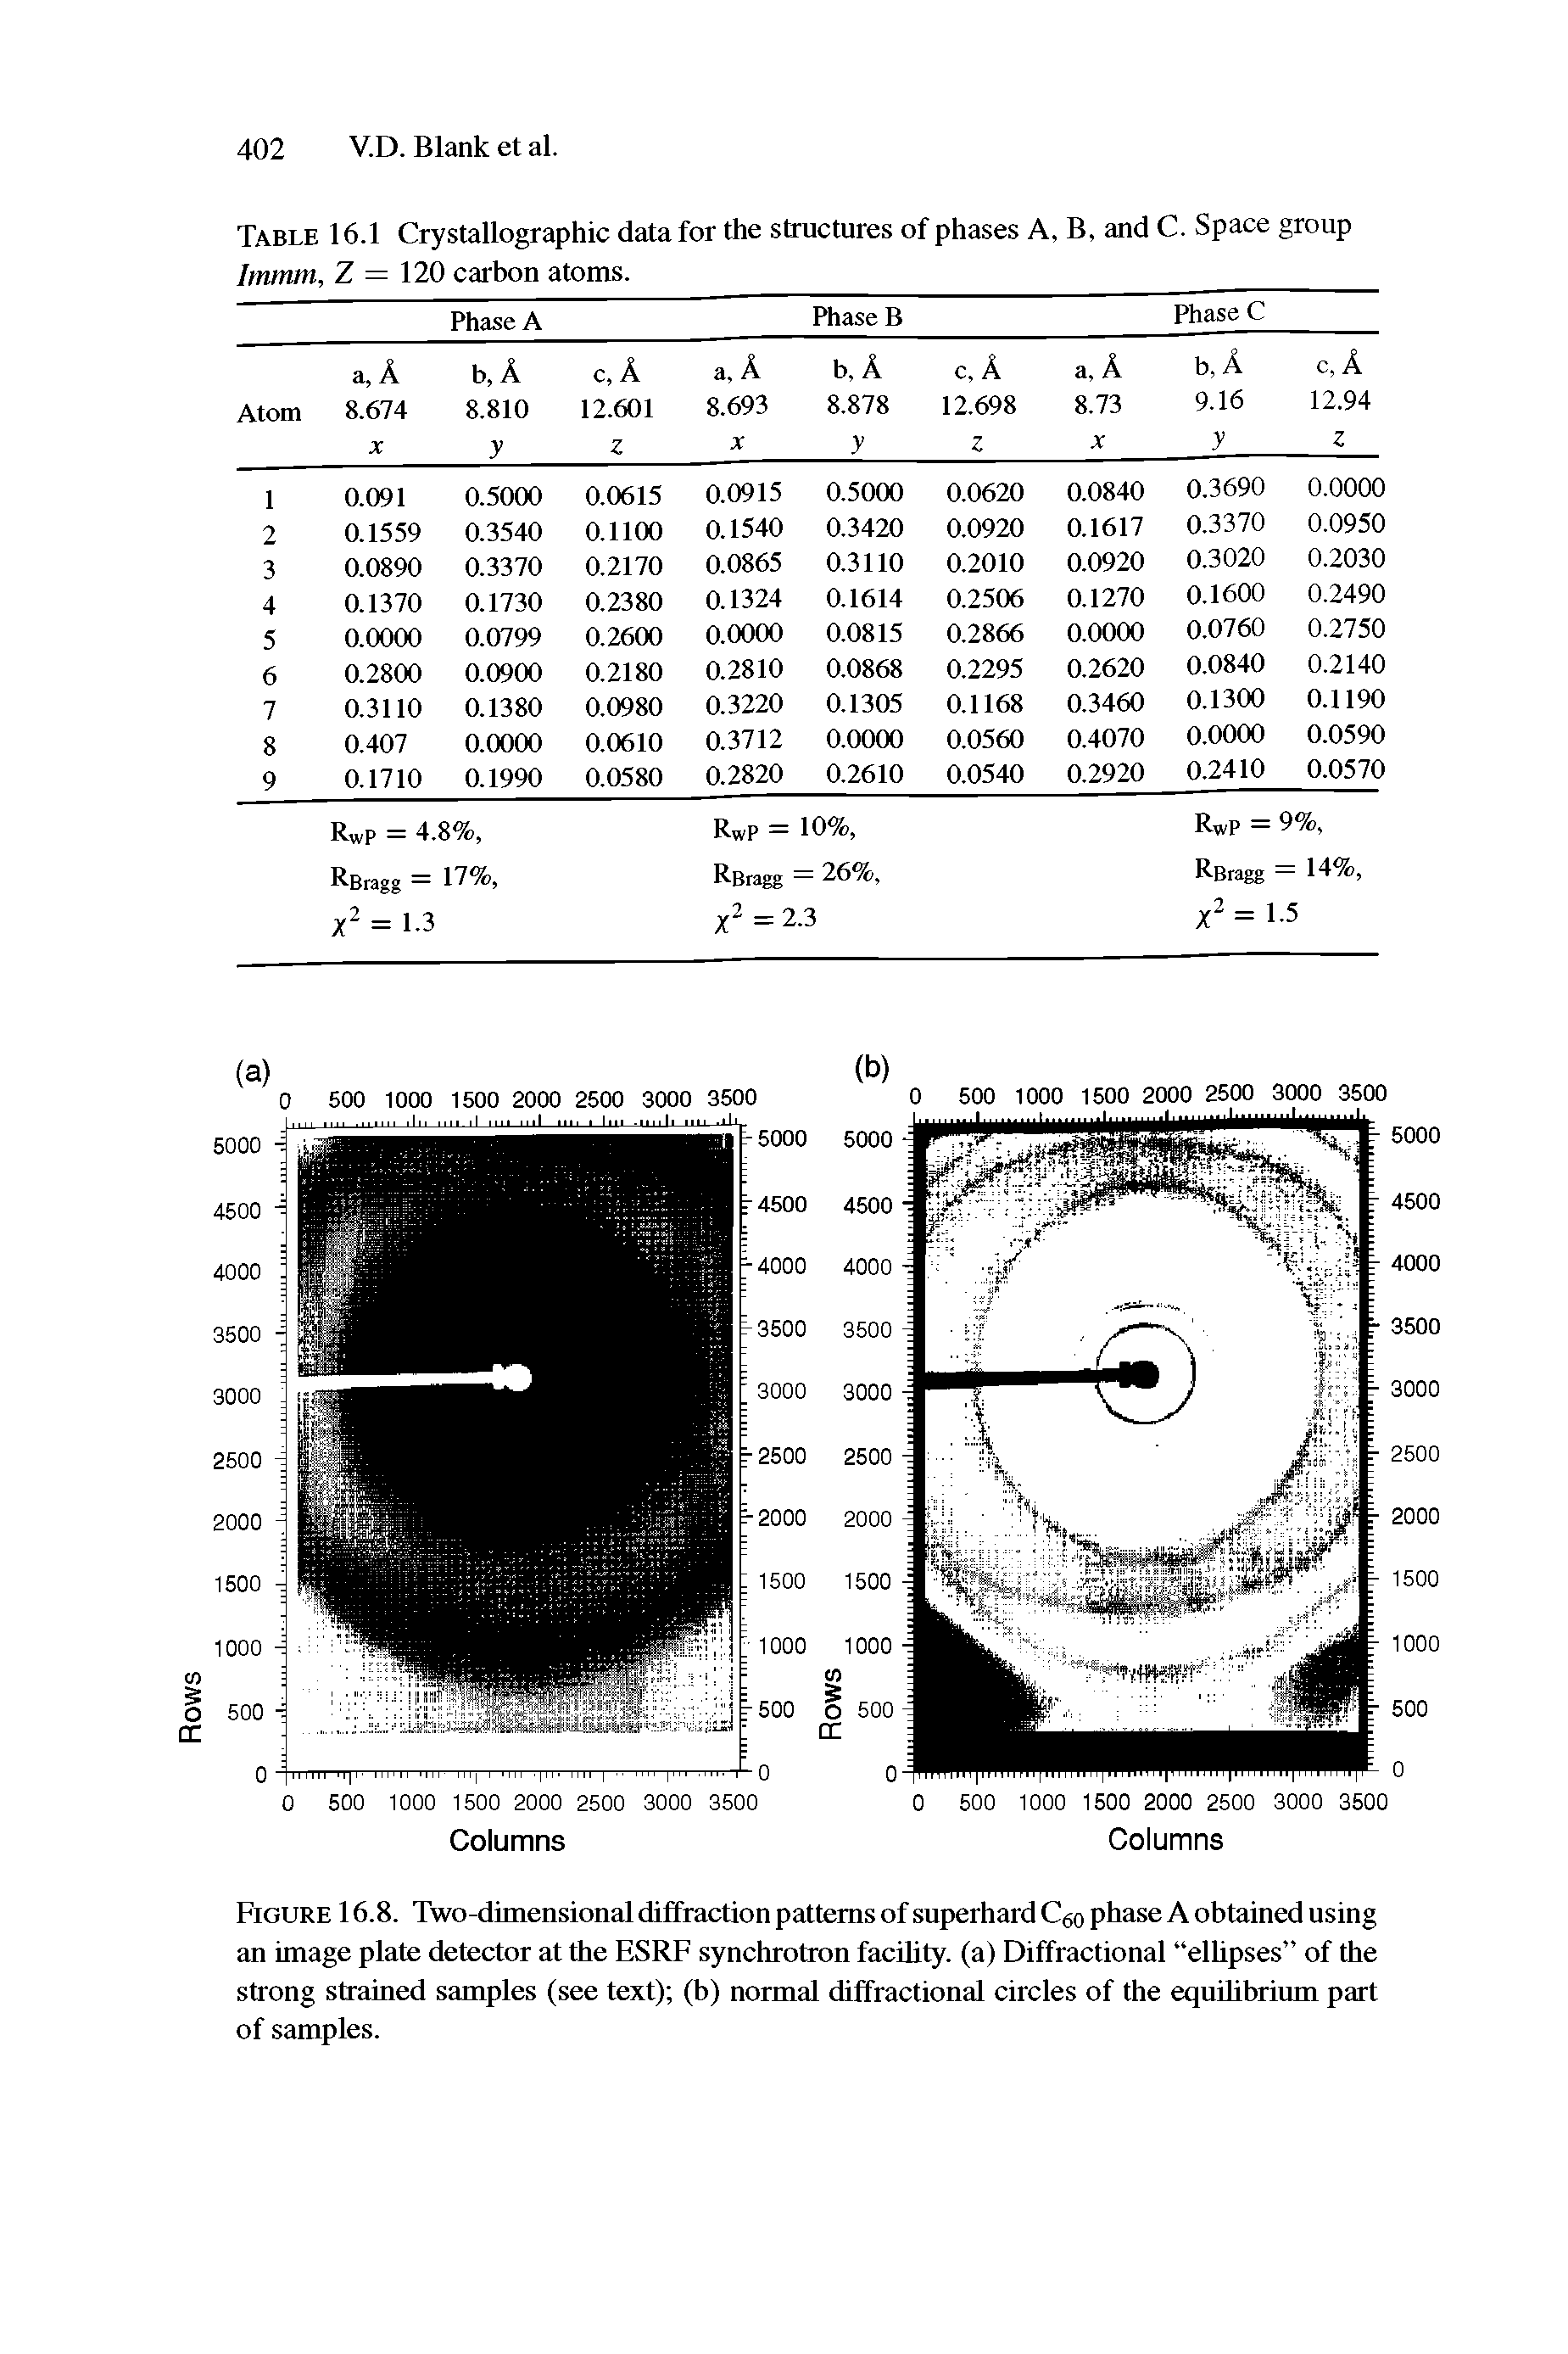 Figure 16.8. Two-dimensional diffraction patterns of snperhard C o phase A obtained using an image plate detector at the ESRF synchrotron facUity. (a) Diffractional ellipses of the strong strained samples (see text) (b) normal diffractional circles of the equilibrium part of samples.